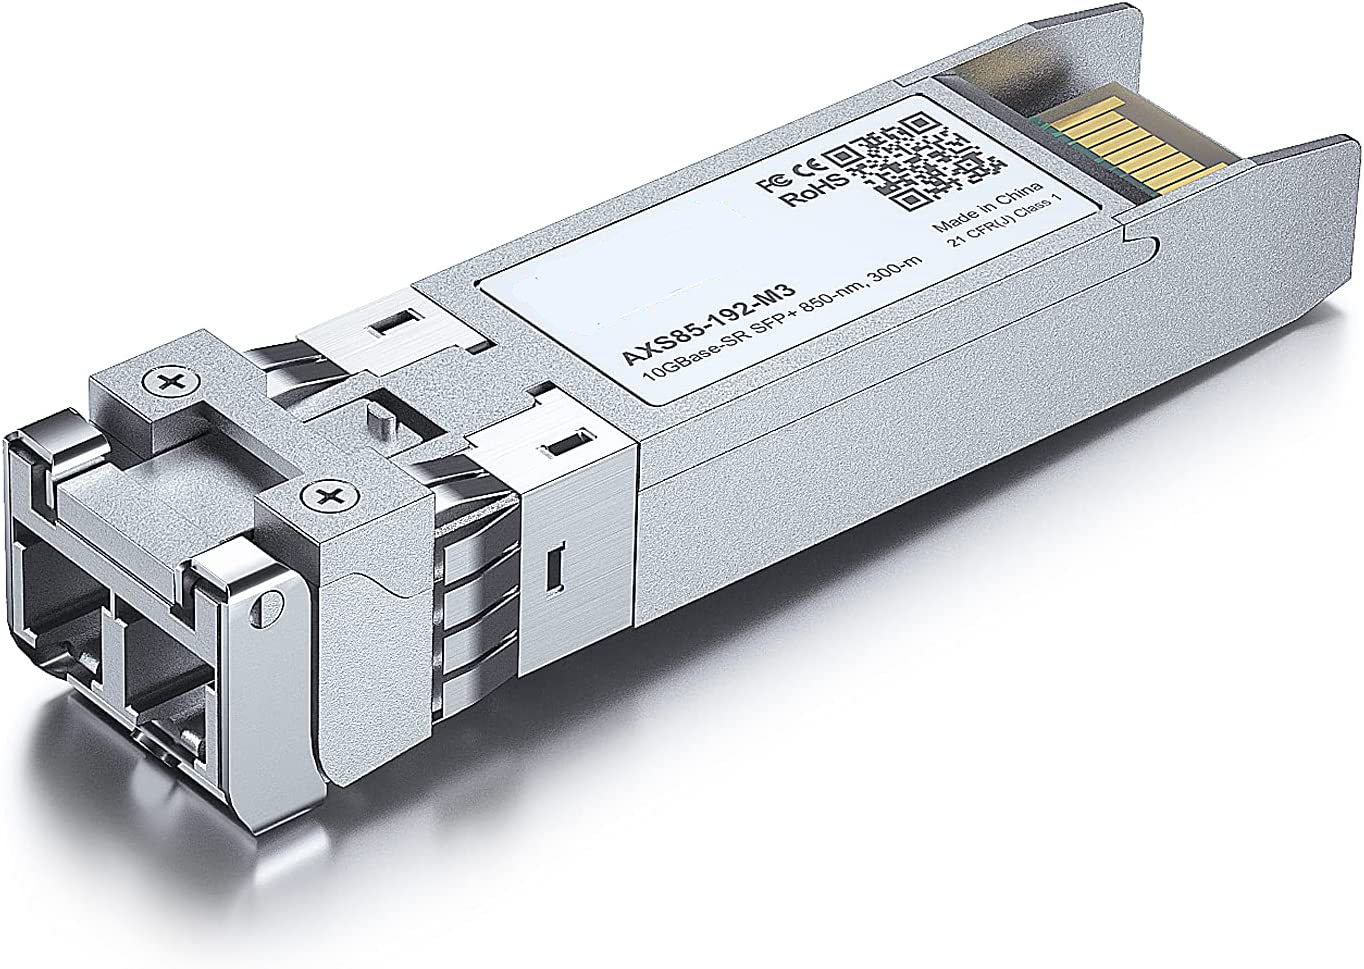 10GBase-SR SFP+ Transceiver, 10G 850nm MMF, up to 300 Meters